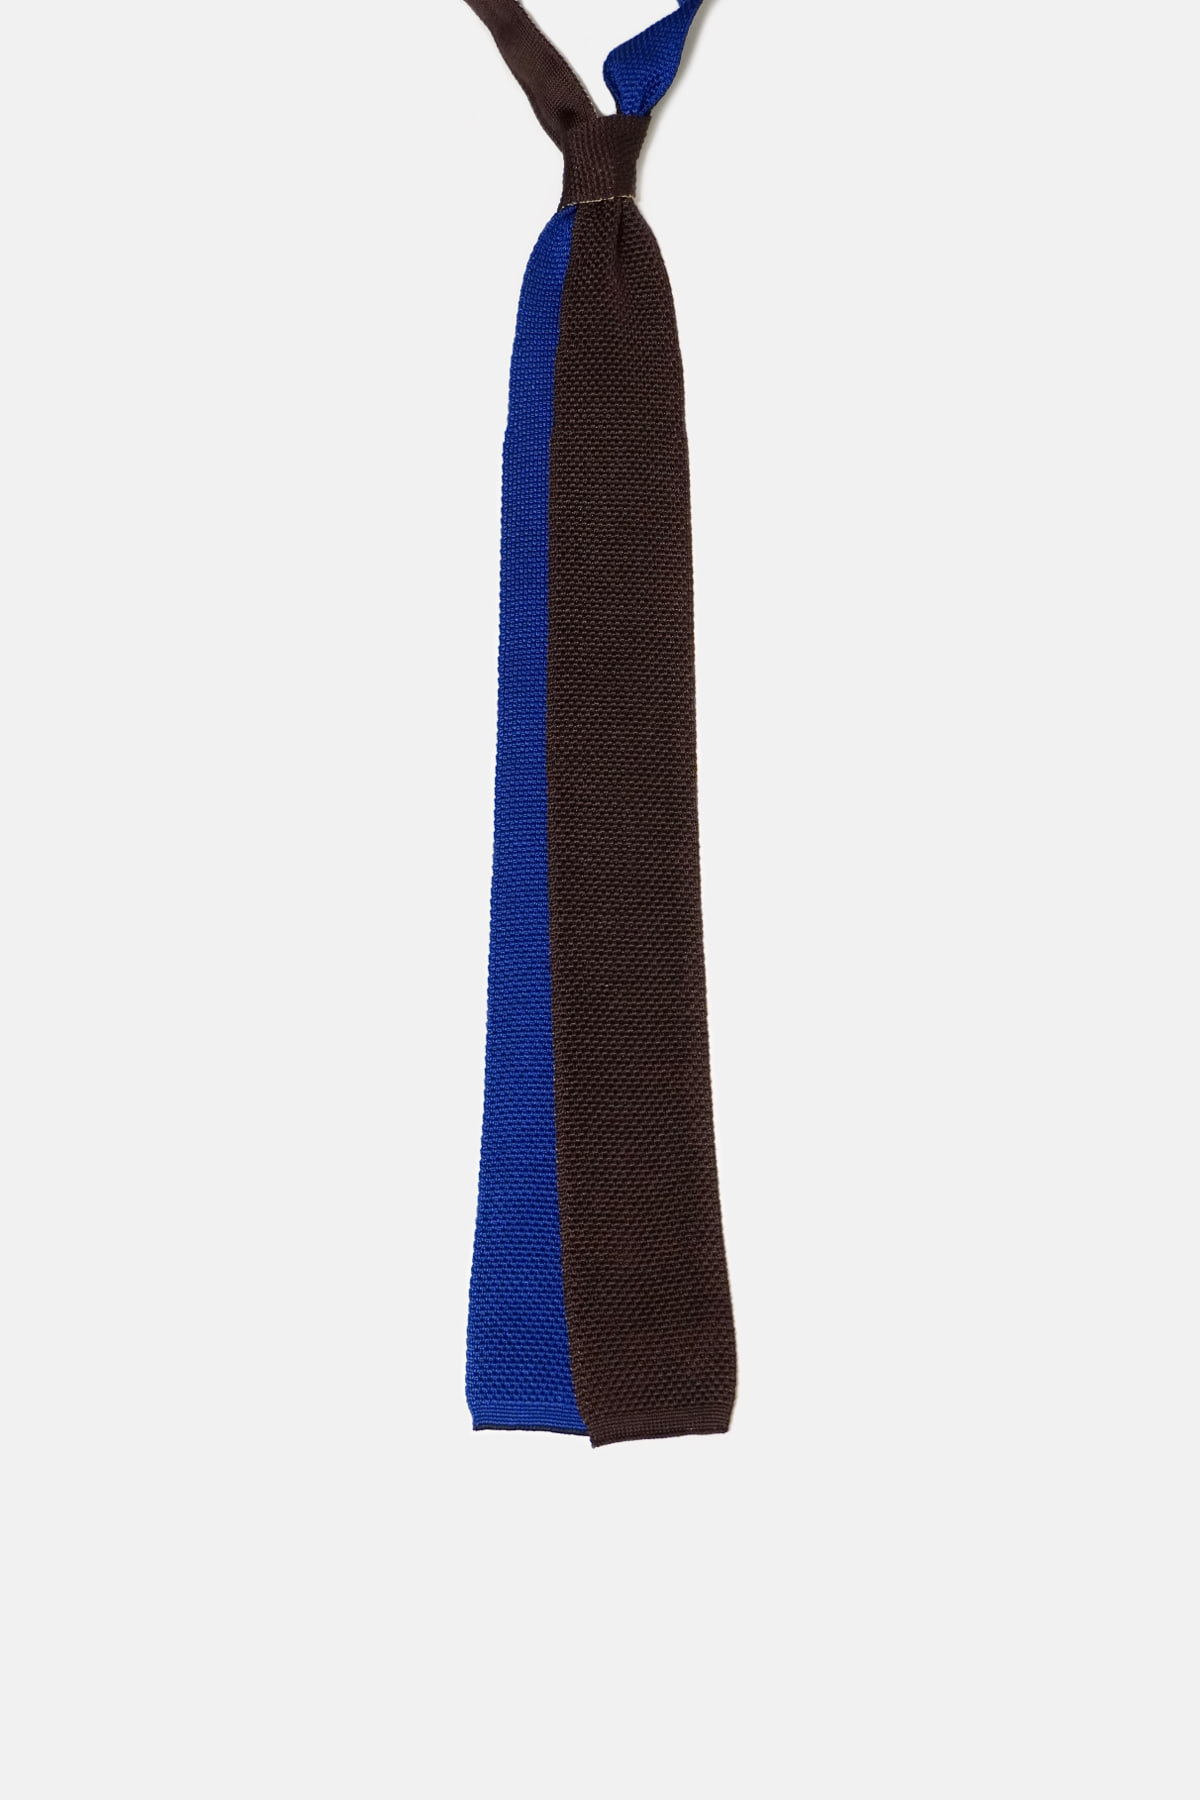 [KENNETH FIELD] 4 Face Tie - Silk Knitted Solid